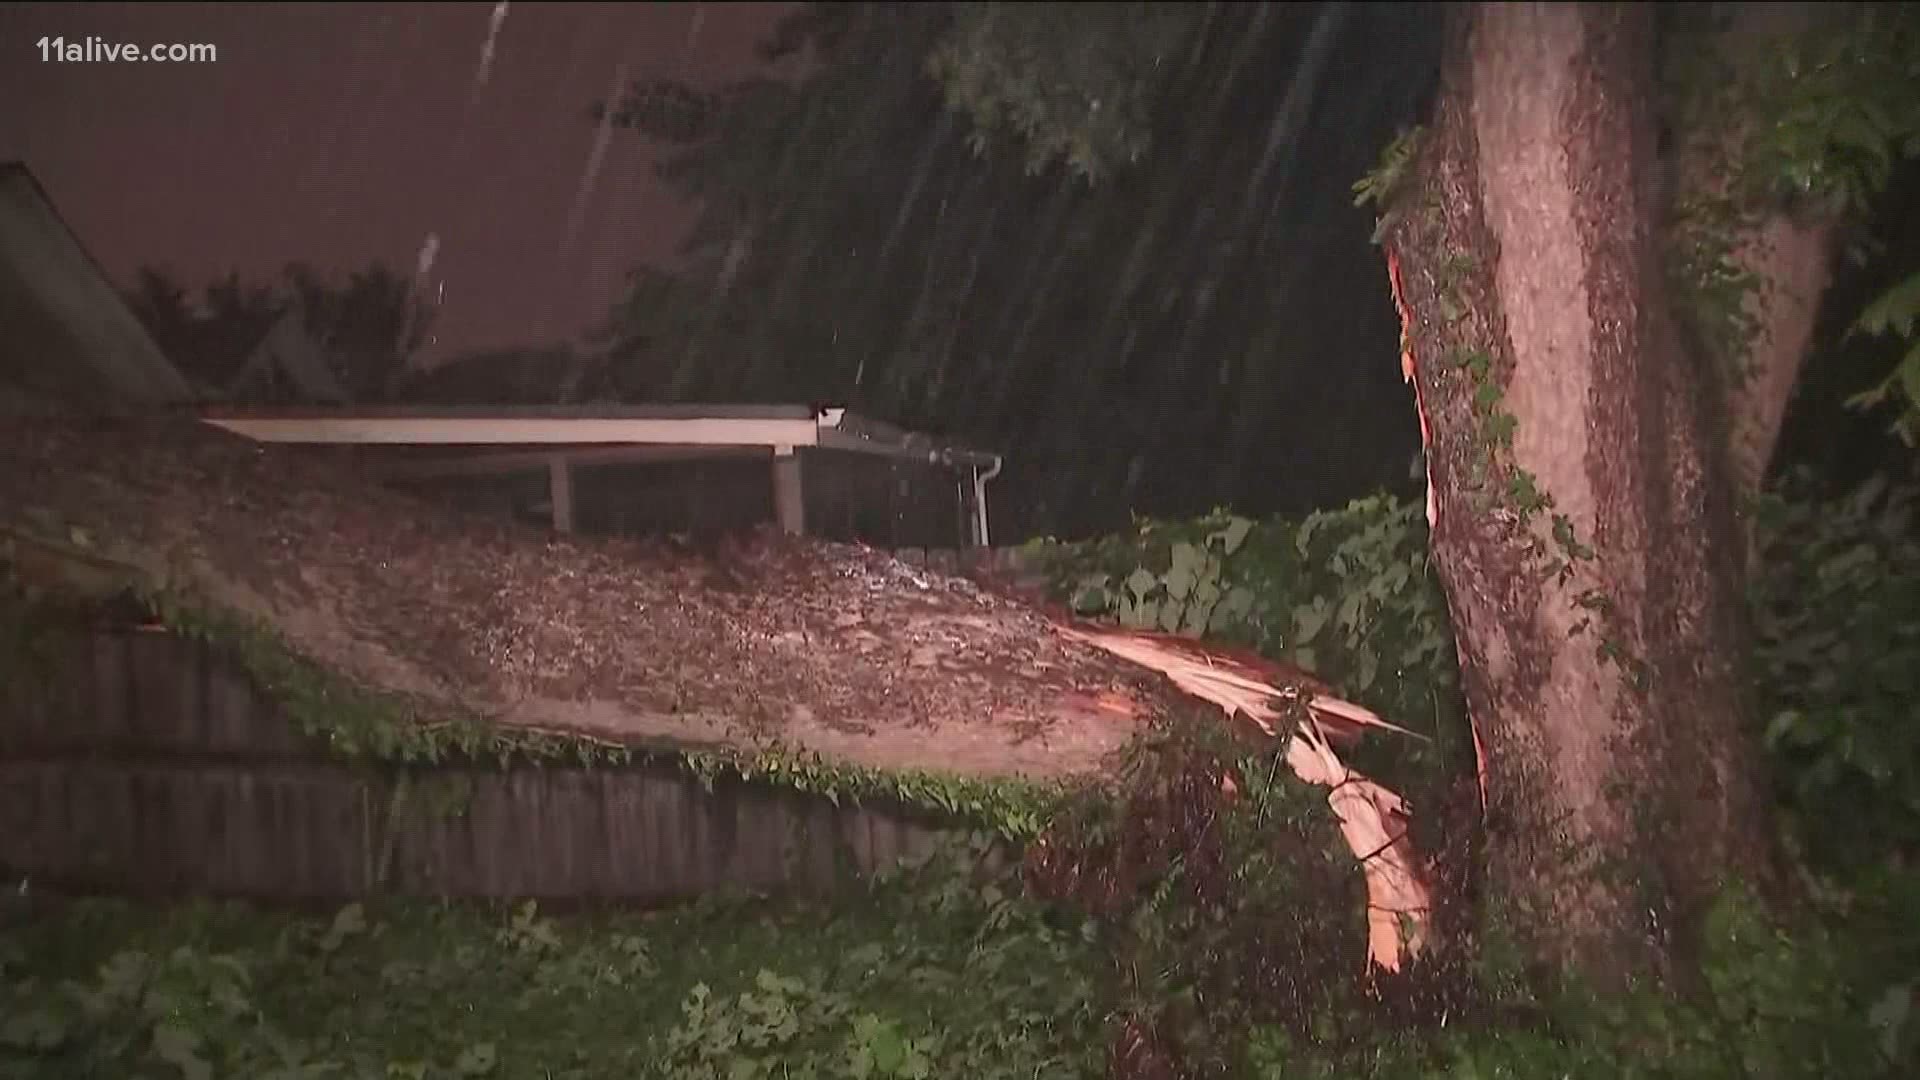 A tree fell on a home on Howell St. NE in the Old Fourth Ward neighborhood. There are no injuries reported.